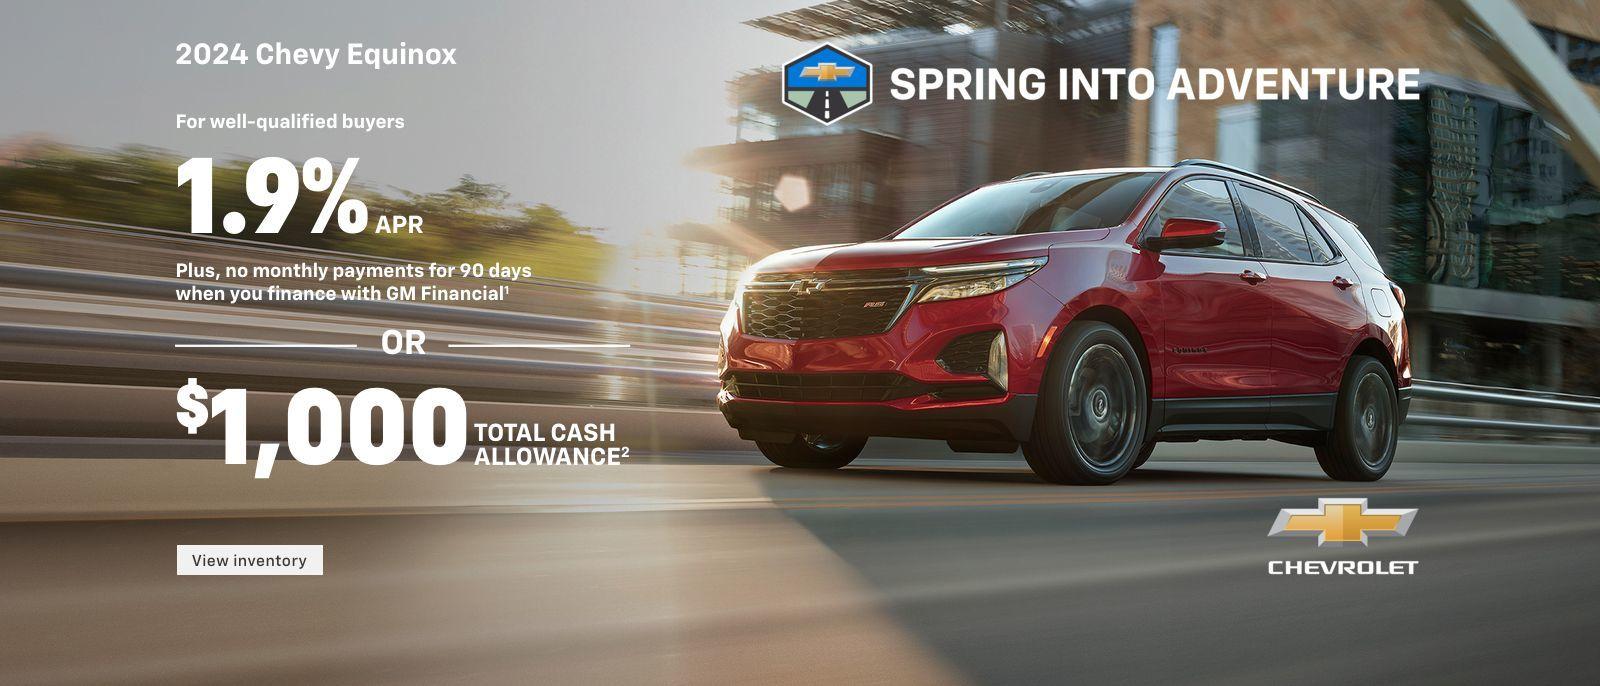 2024 Chevy Equinox. Smart without settling. For well-qualified buyers 1.9% APR + no monthly payments for 90 days when you finance with GM Financial. Or, $1,000 total cash allowance.